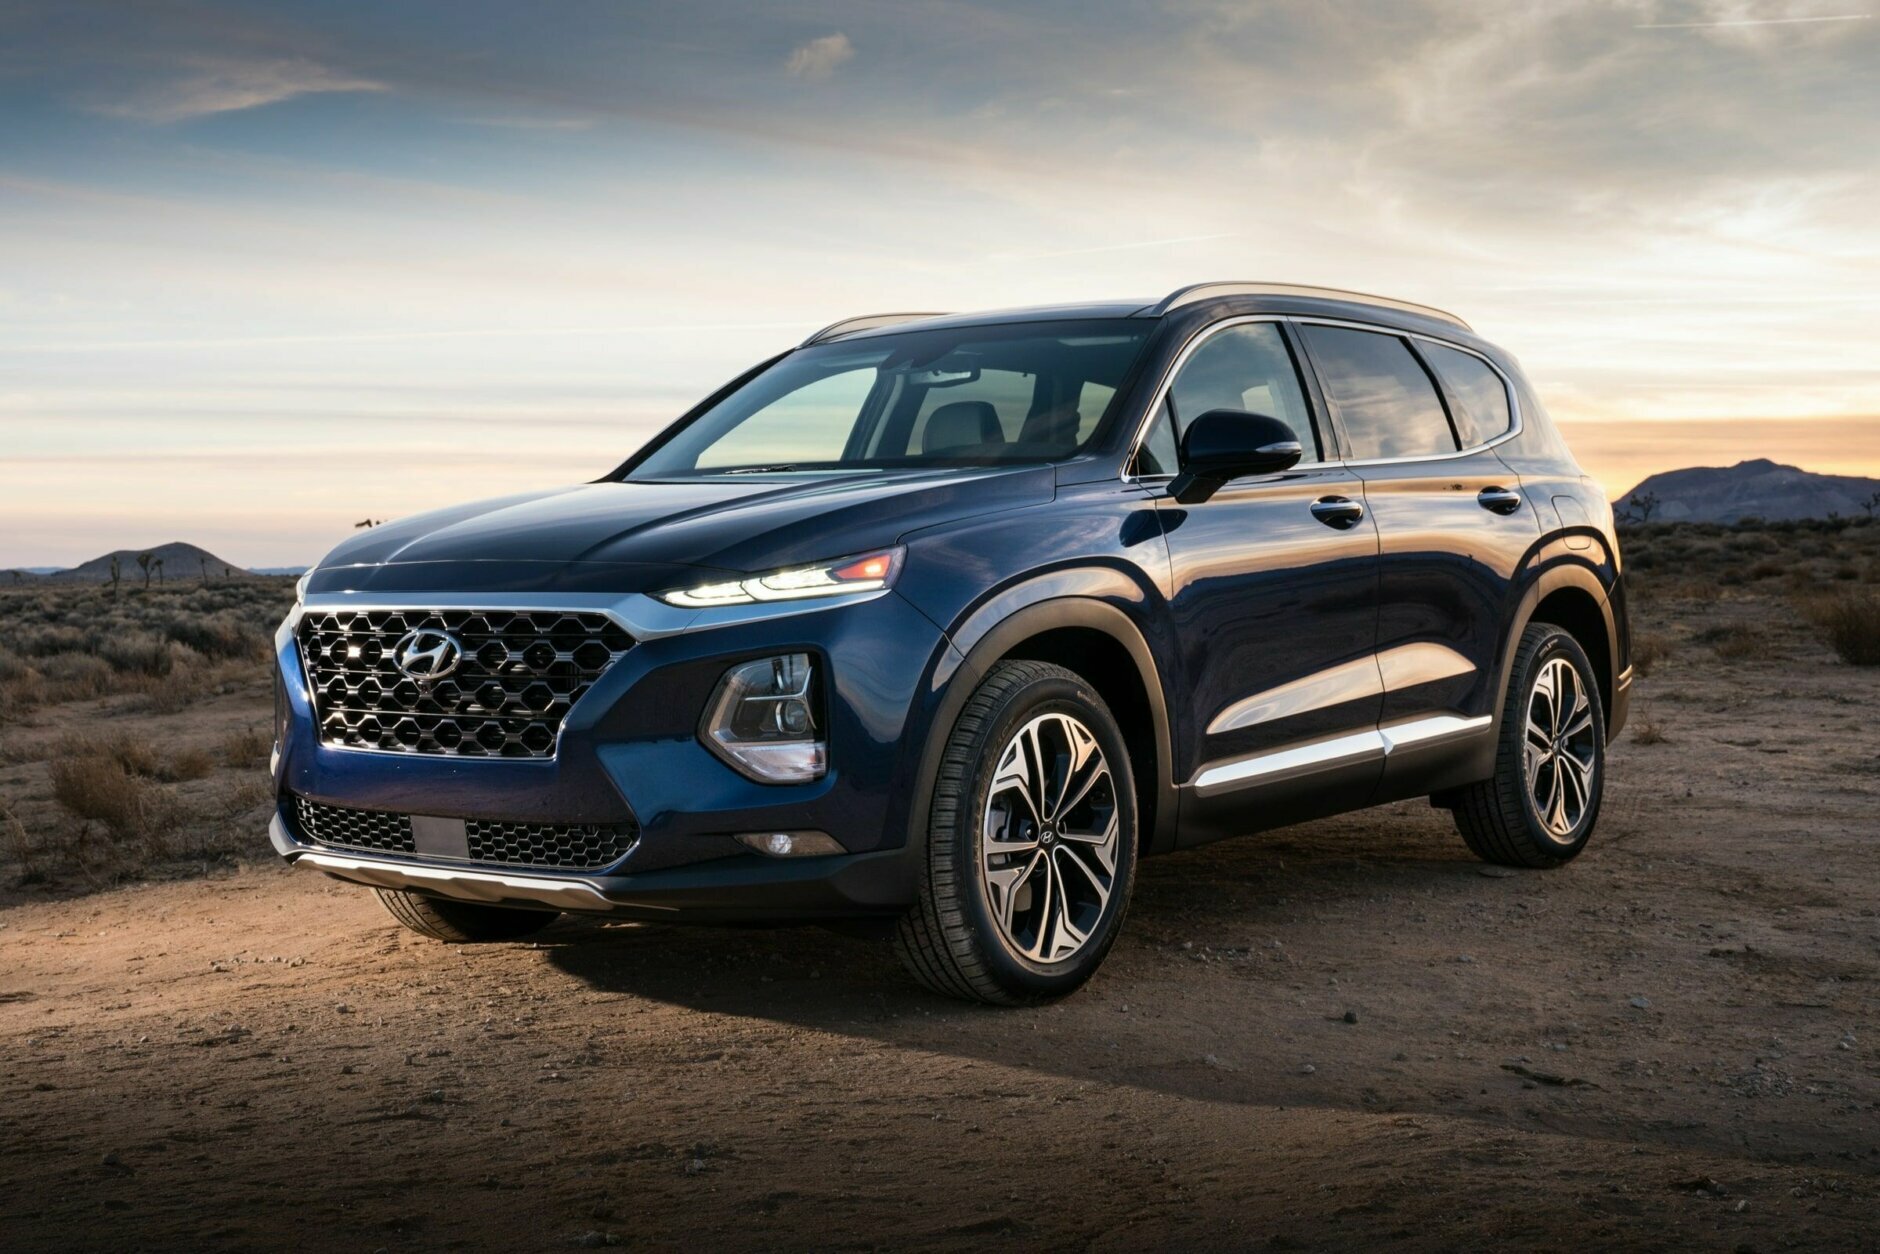 <p><strong>Best SUV for teens $35,000 to $40,000:</strong> The Hyundai Santa Fe</p>
